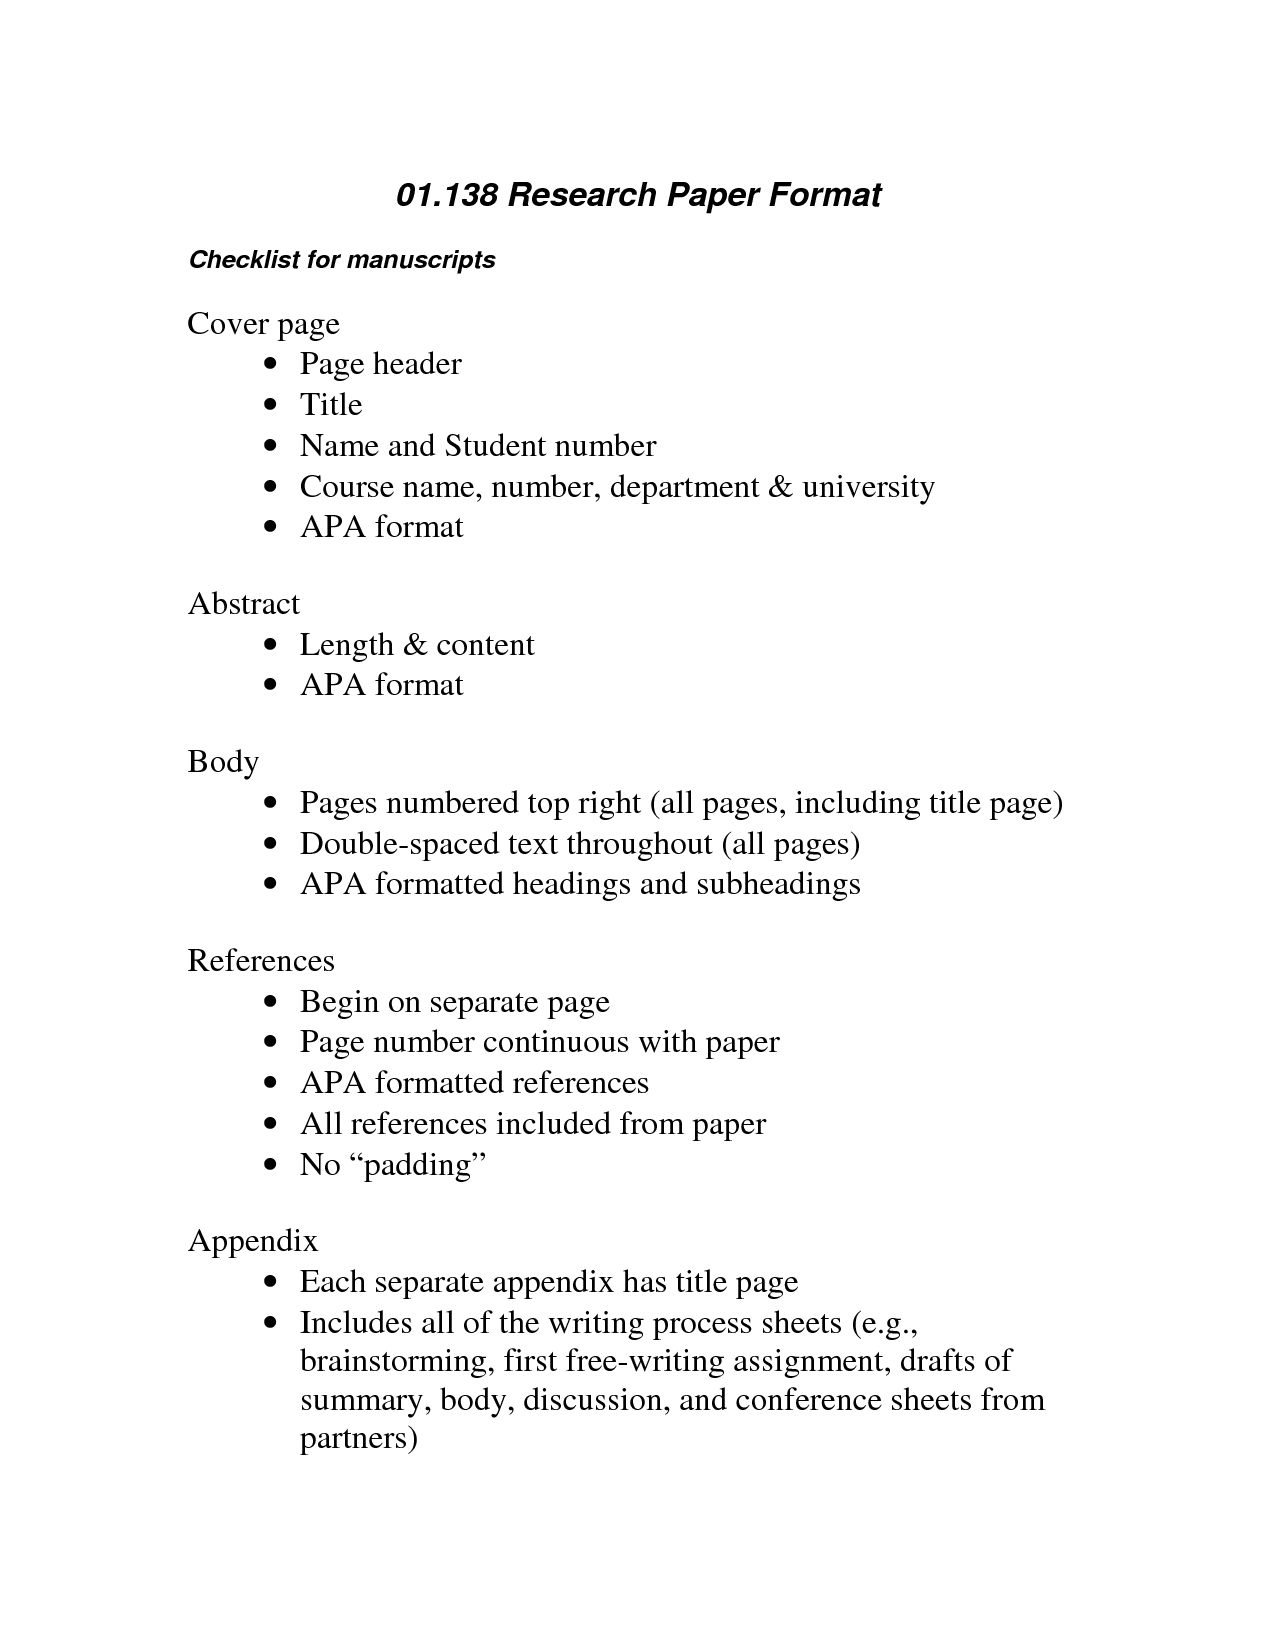 Research Paper Template Apa Format Check List Scope Of Work With Apa Research Paper Template Word 2010